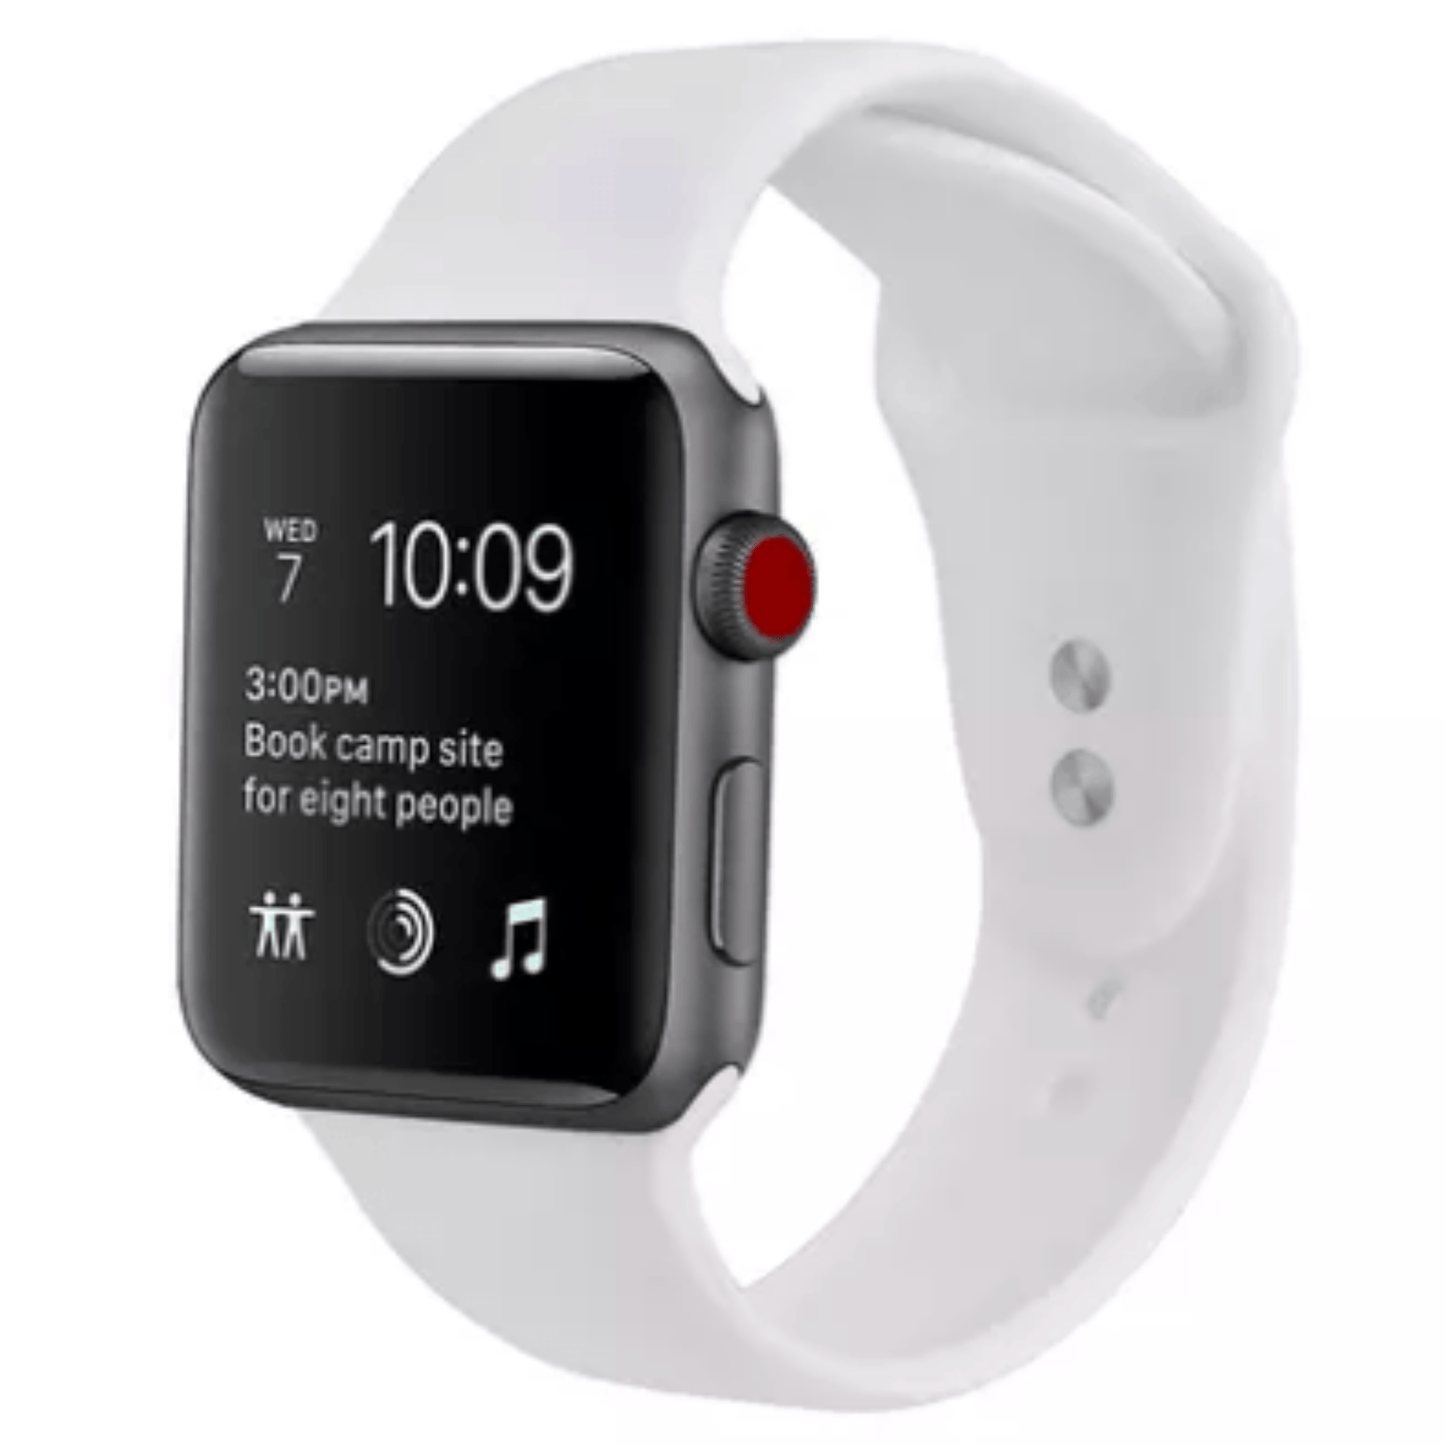 Silicone Sport Replacement Band for Apple Watch White Apple Watch Band Elements Watches